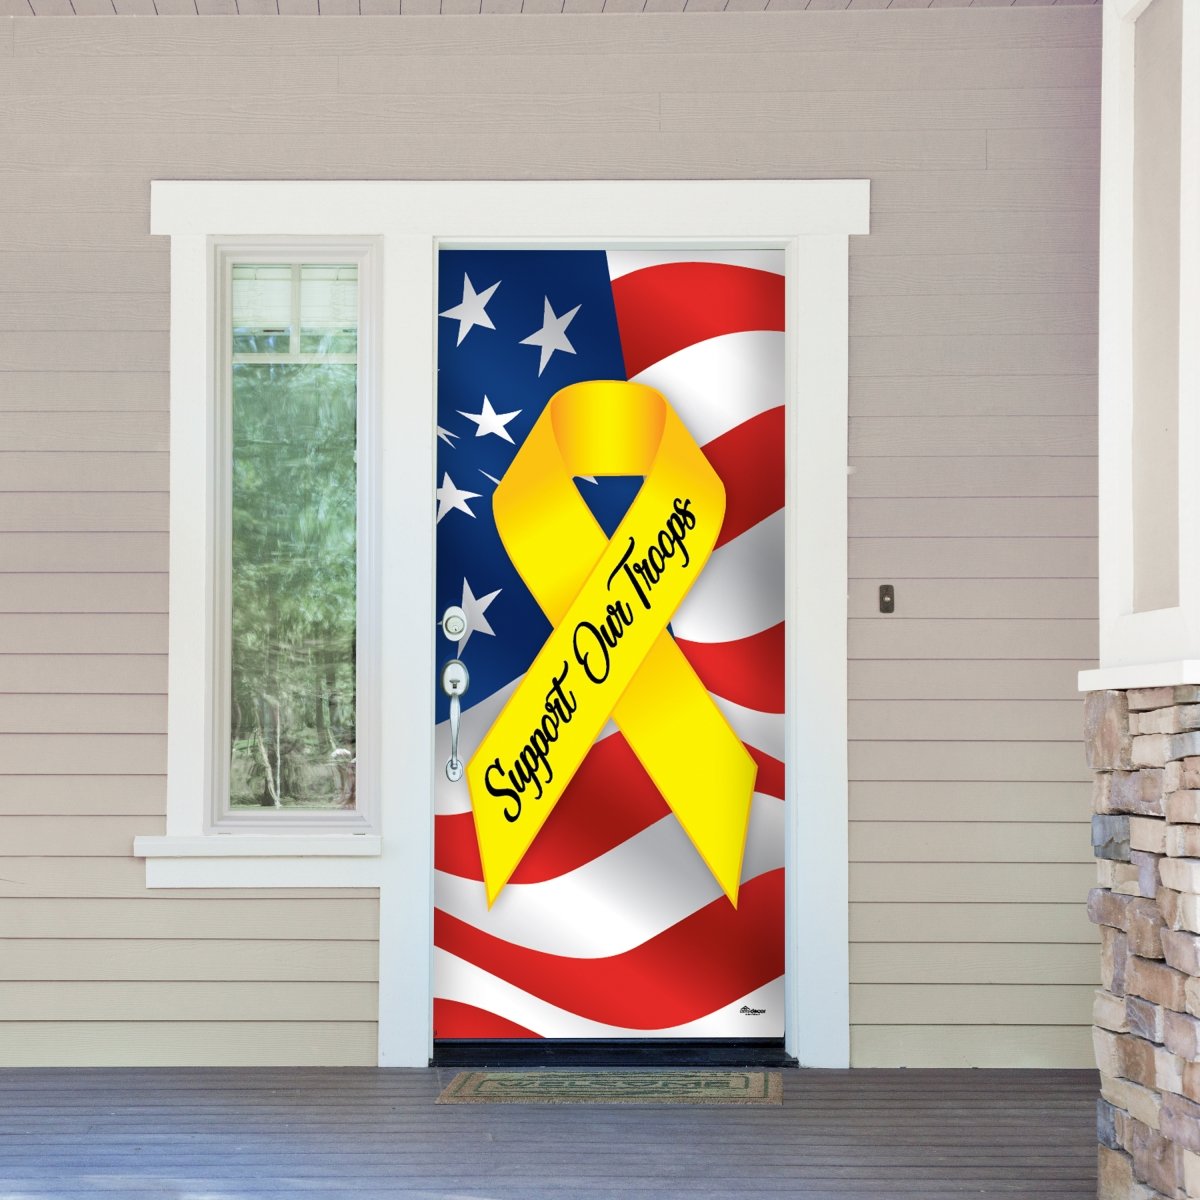 285906patr-006 36 X 80 In. Support Our Troops Patriotic Holiday Front Door Mural Sign Banner Decor, Multi Color